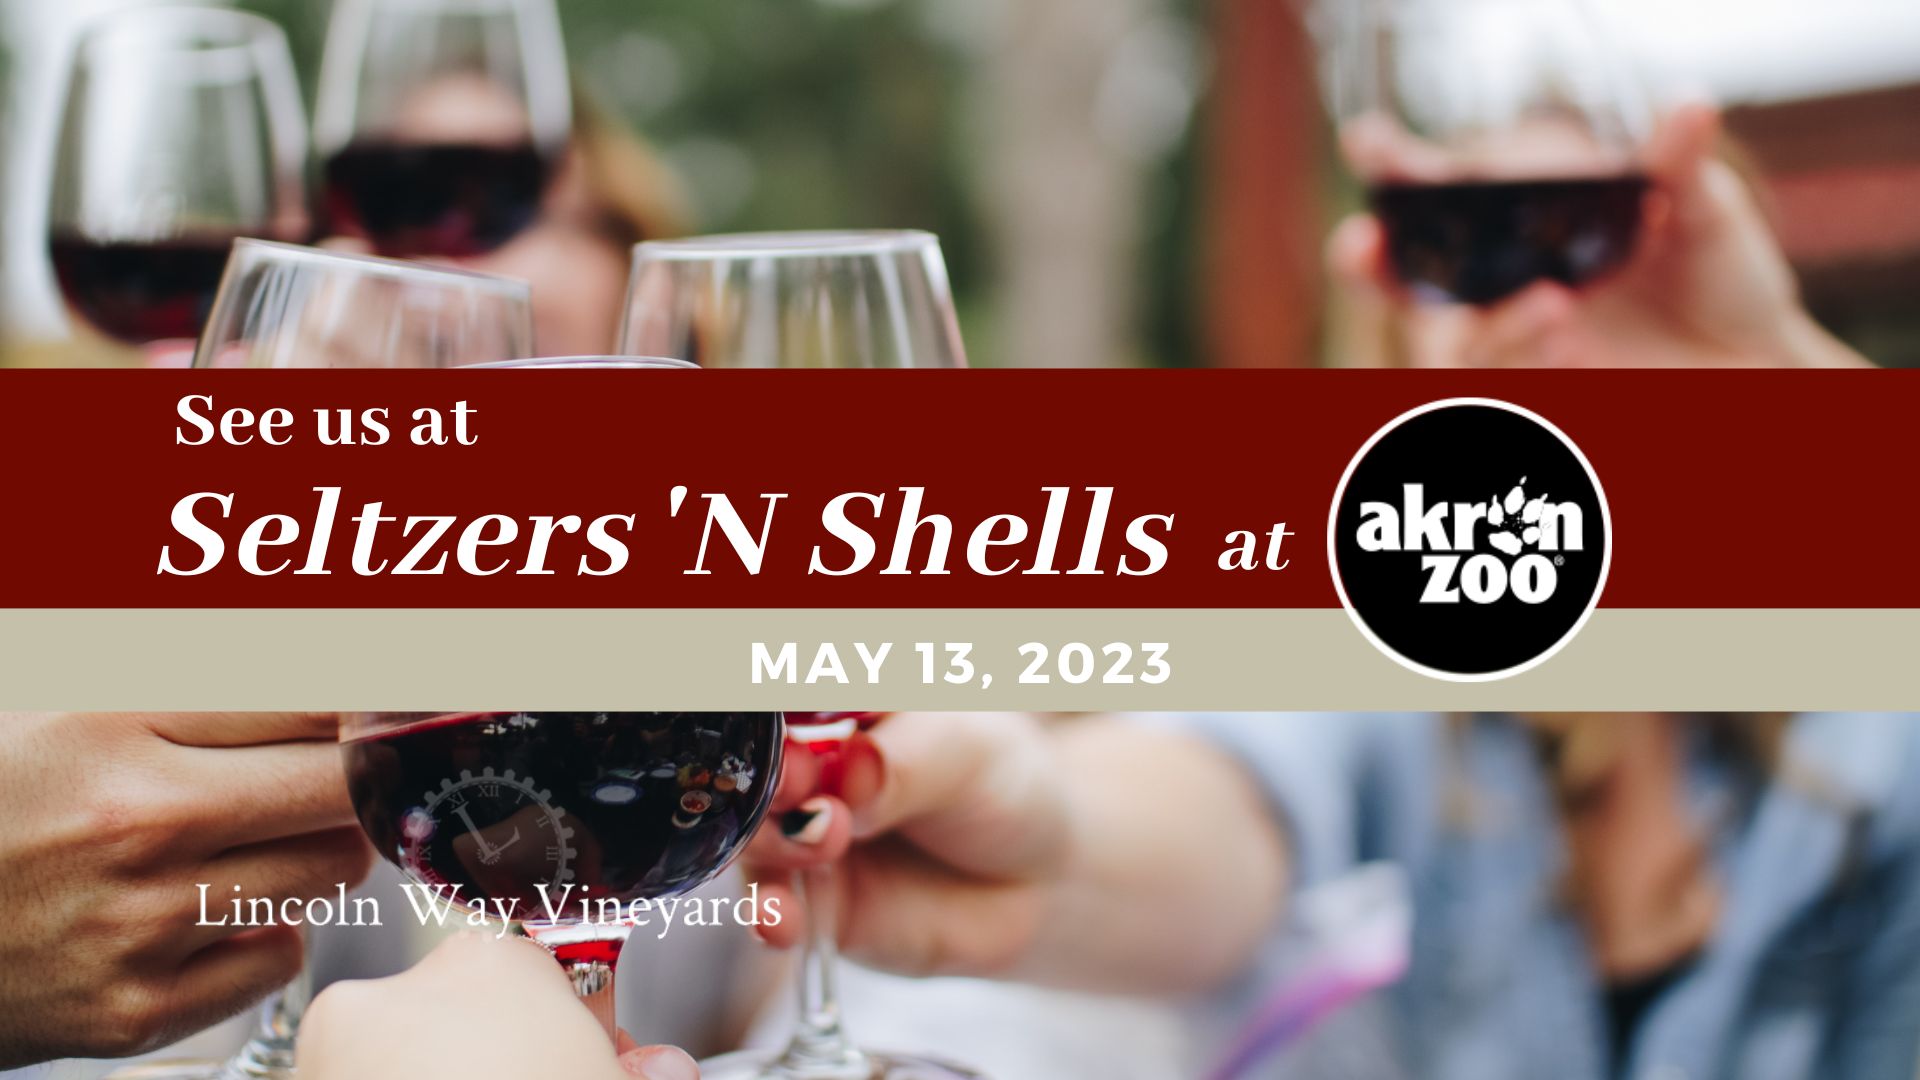 Seltzers 'N Shells at the Akron Zoo